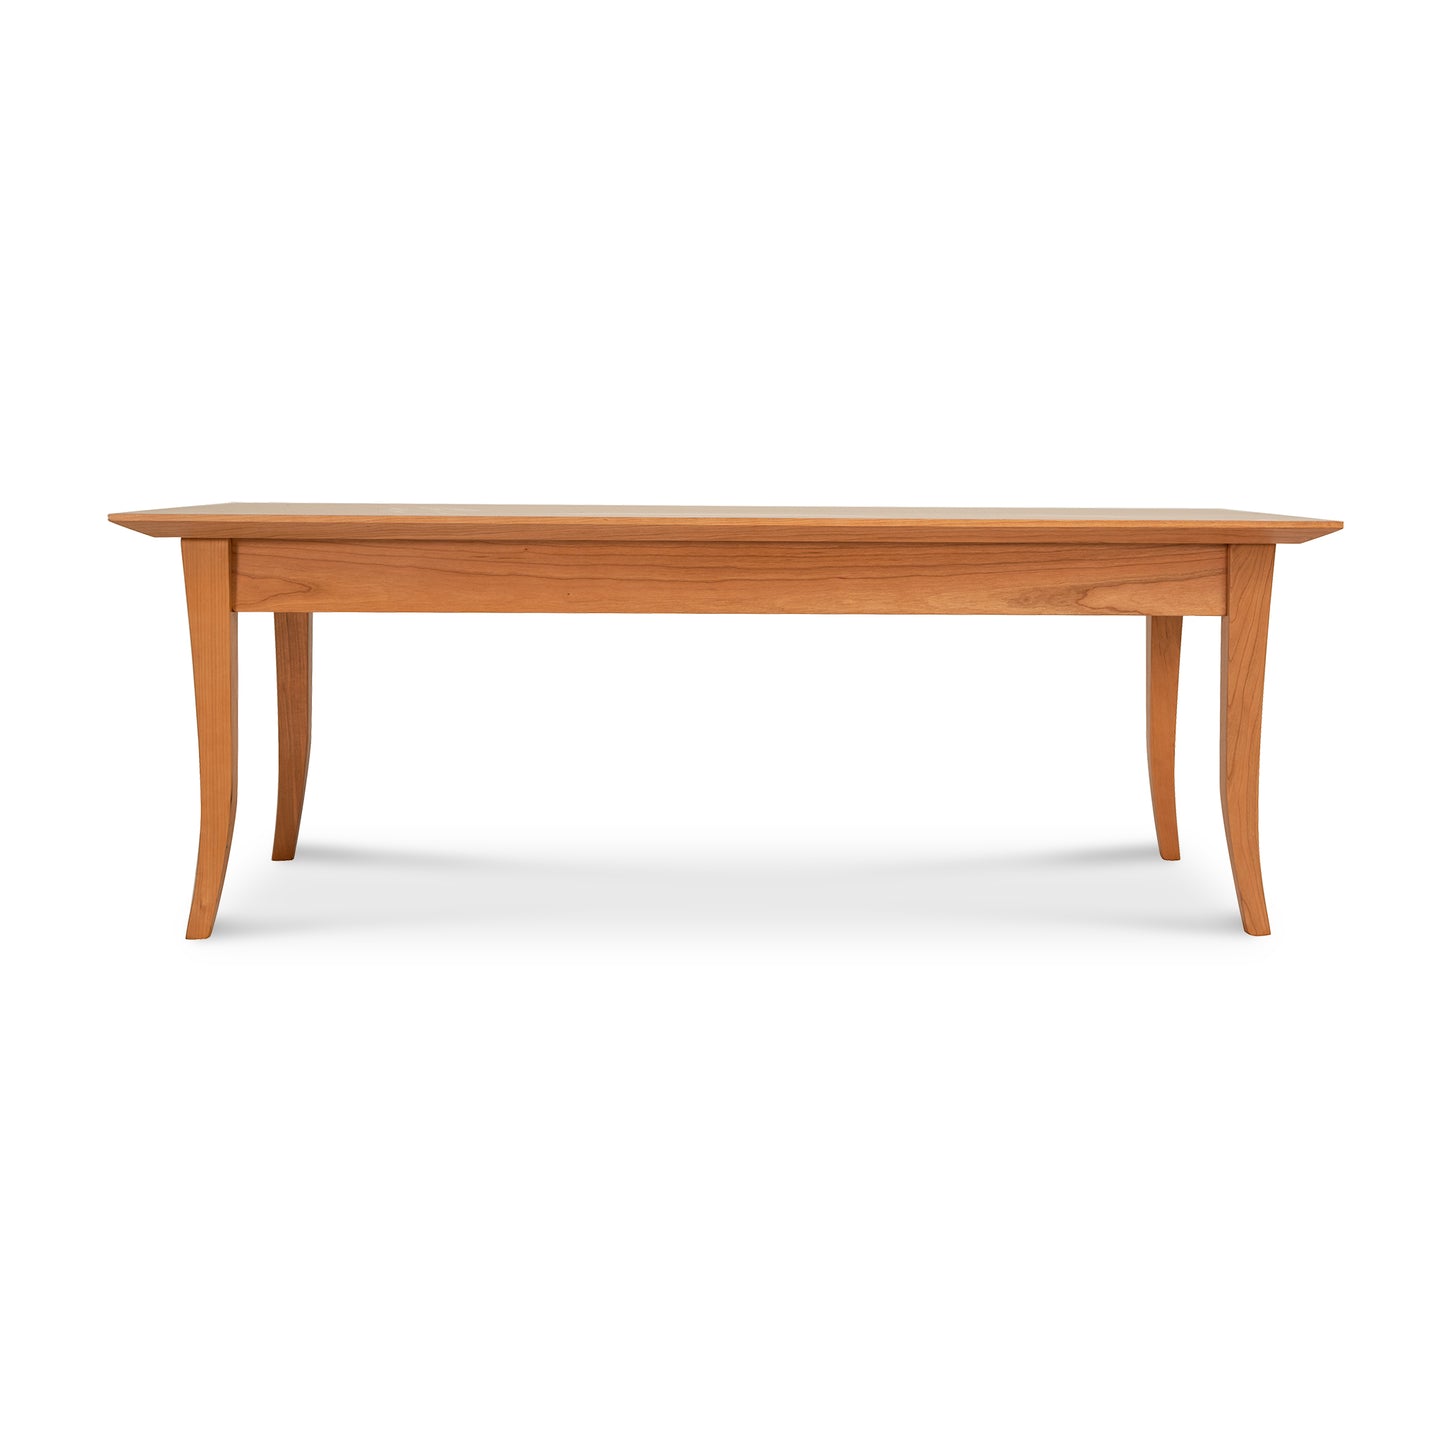 A wooden Lyndon Furniture Classic Shaker Flare Leg Coffee Table that combines functionality and style.